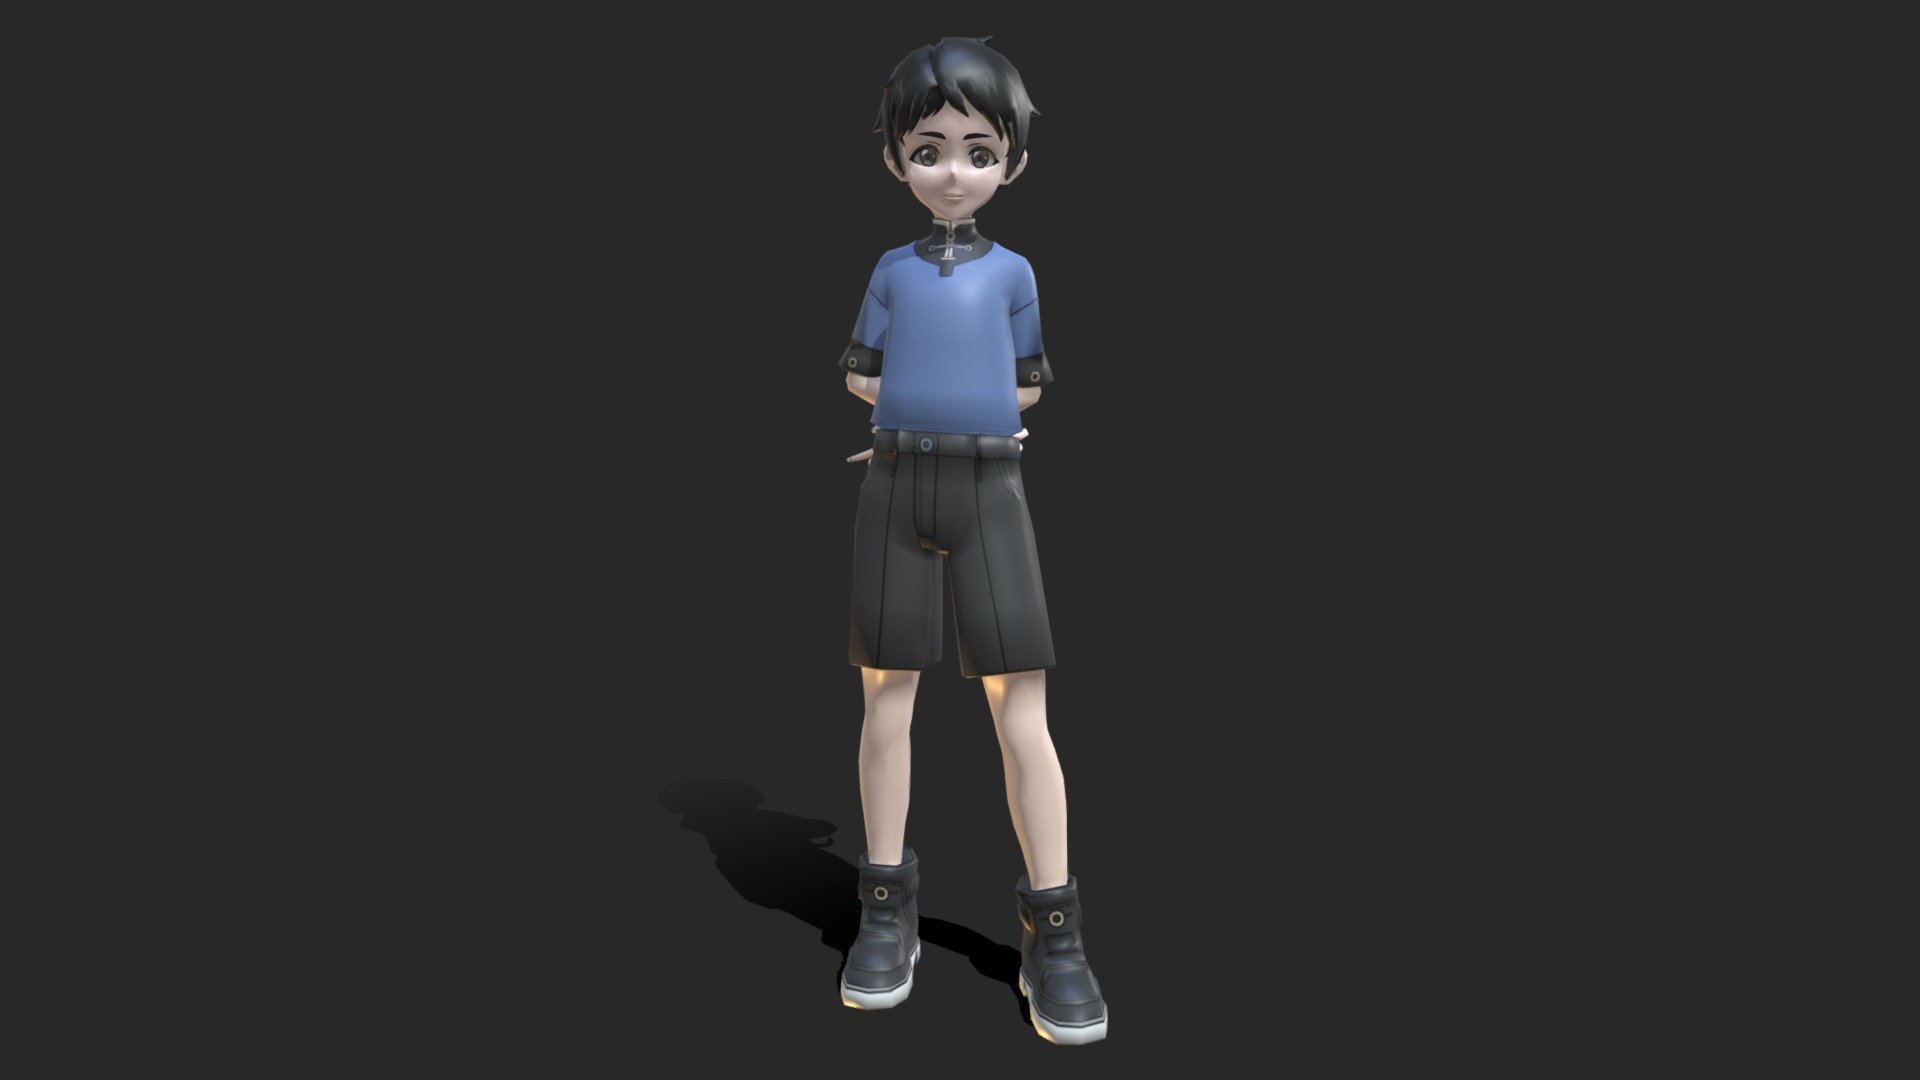 One model: 6691 triangles, 5657 vertices.

Three materials:





Body 2048x2048: color and metallic.







Face 2048x2048: color and metallic.







Hair: color (32x32) and metallic (1024x1024).



Rigged and animated with 82 clips

The rig type is Humanoid.

Three fingers hands.

Mouth not rigged.
 - Anime Boy - 3D model by Naoki Idaka (@NaokiIdaka) 3d model